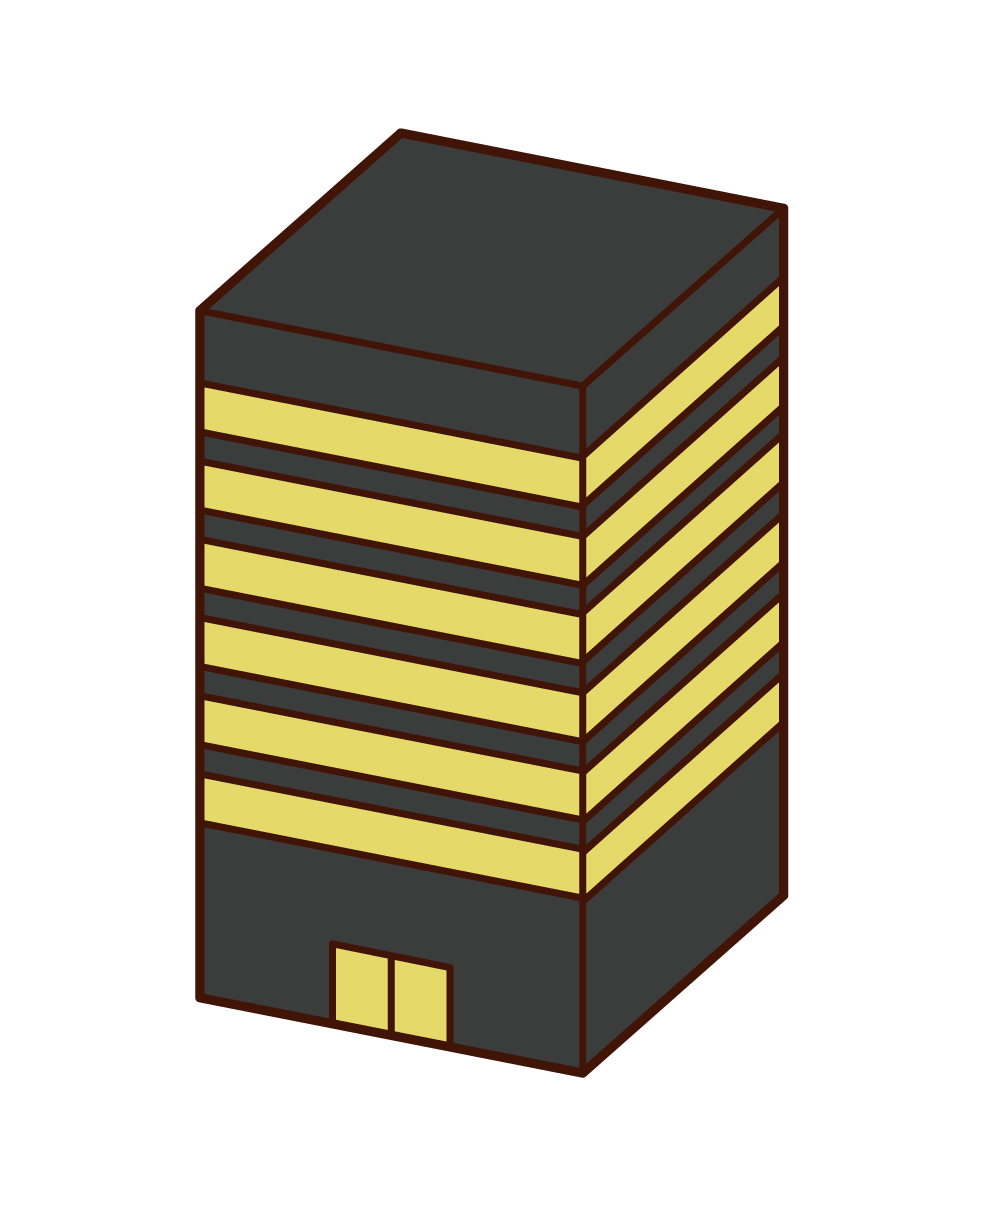 Illustration of a high-rise building